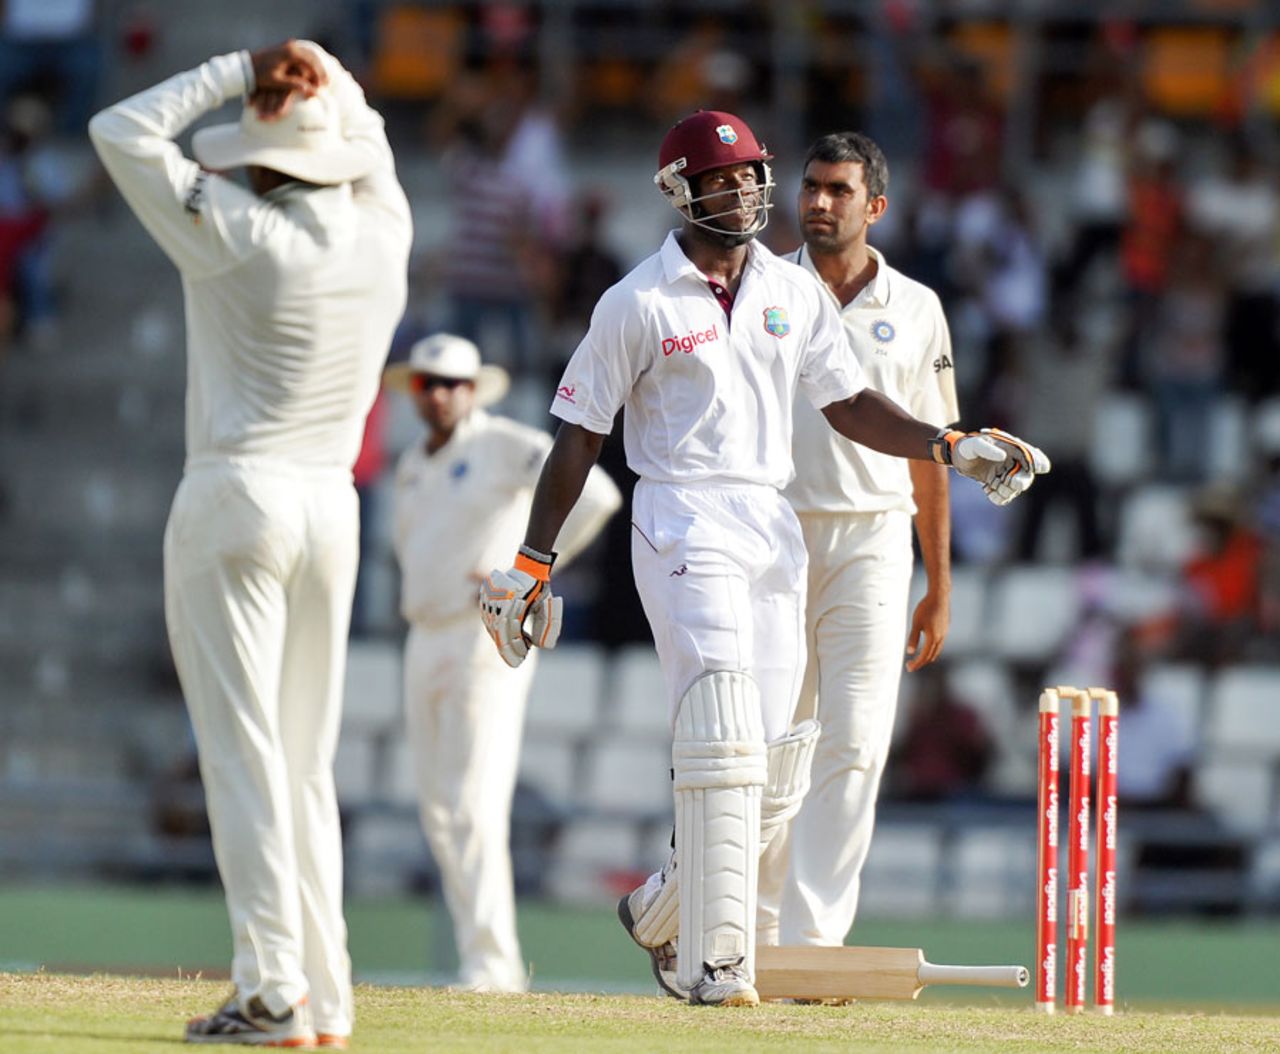 Harbhajan Singh missed the direct hit that could have run out Kirk Edwards on 99, West Indies v India, 3rd Test, Dominica, 4th day, July 9, 2011